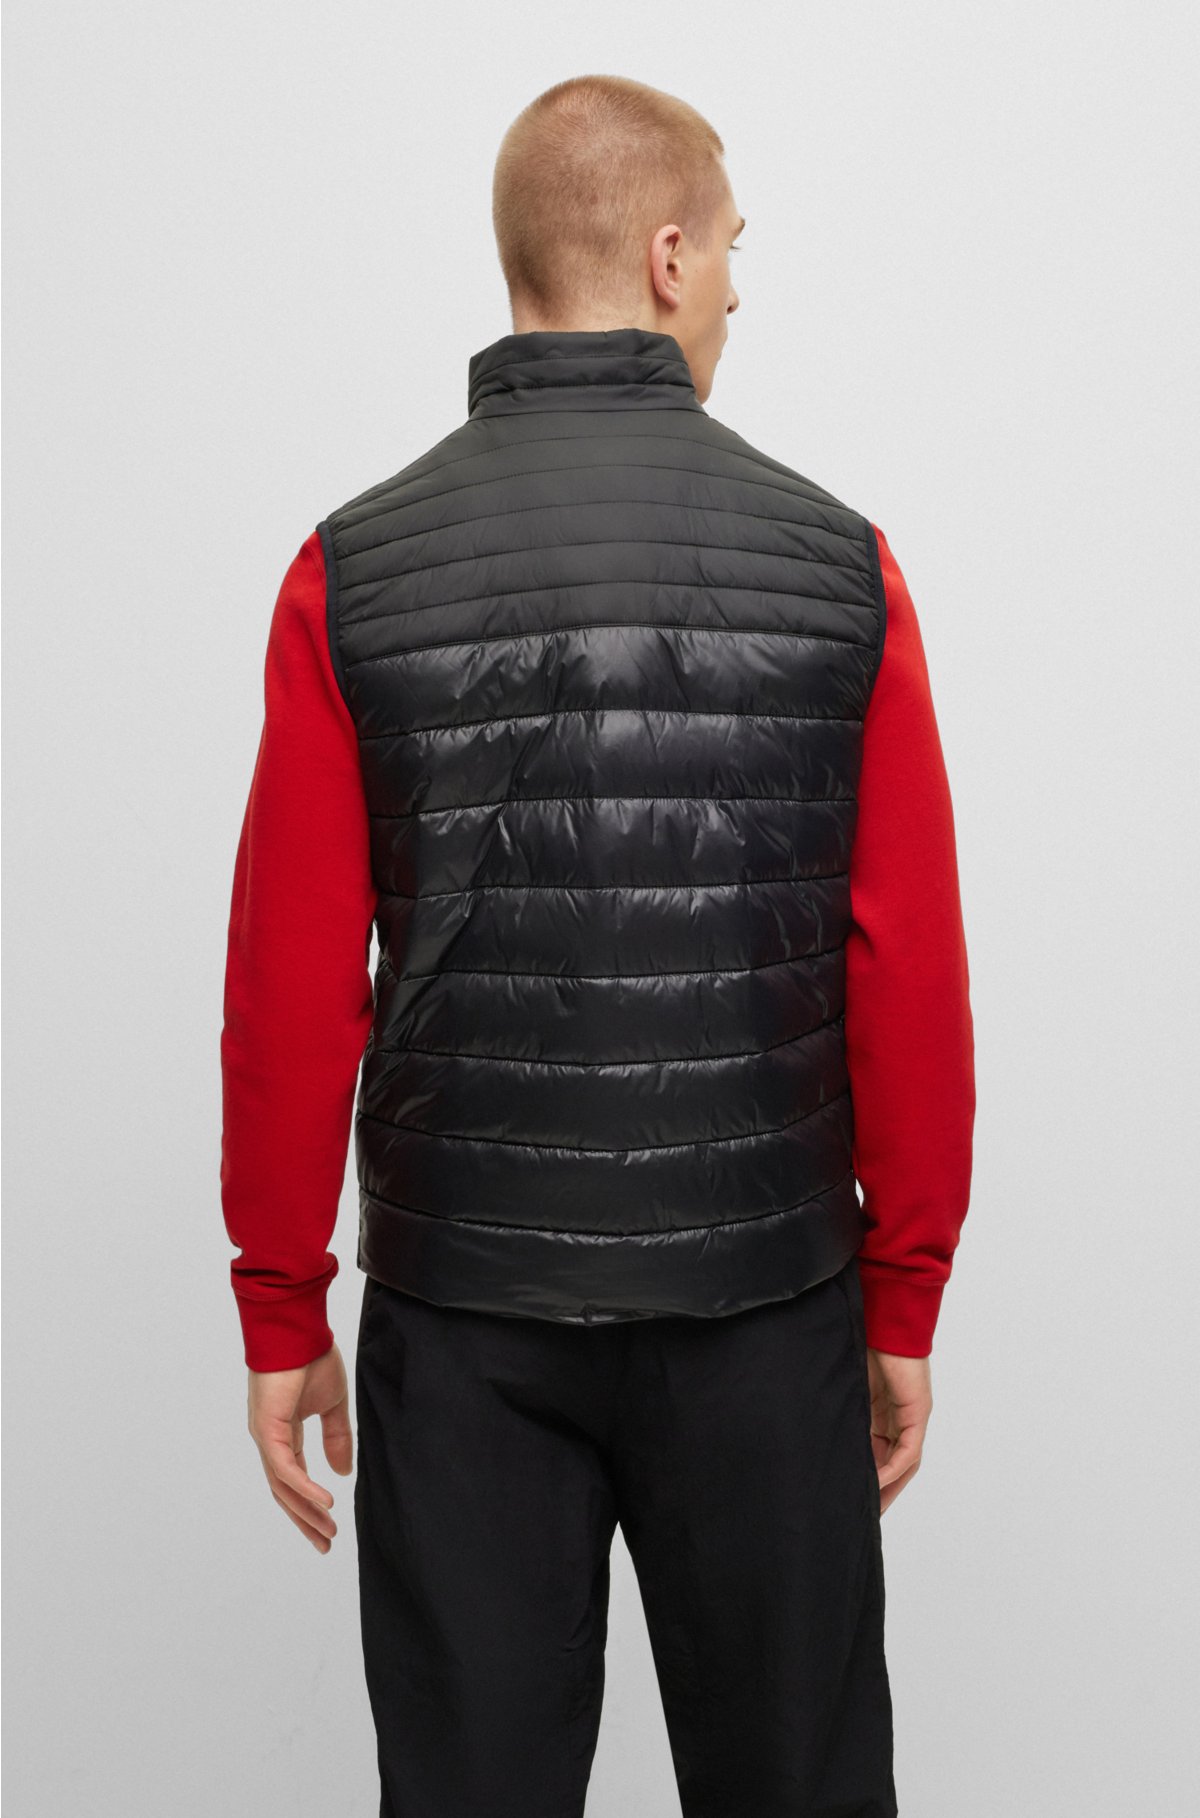 and matte gloss - BOSS Water-repellent gilet in fabrics